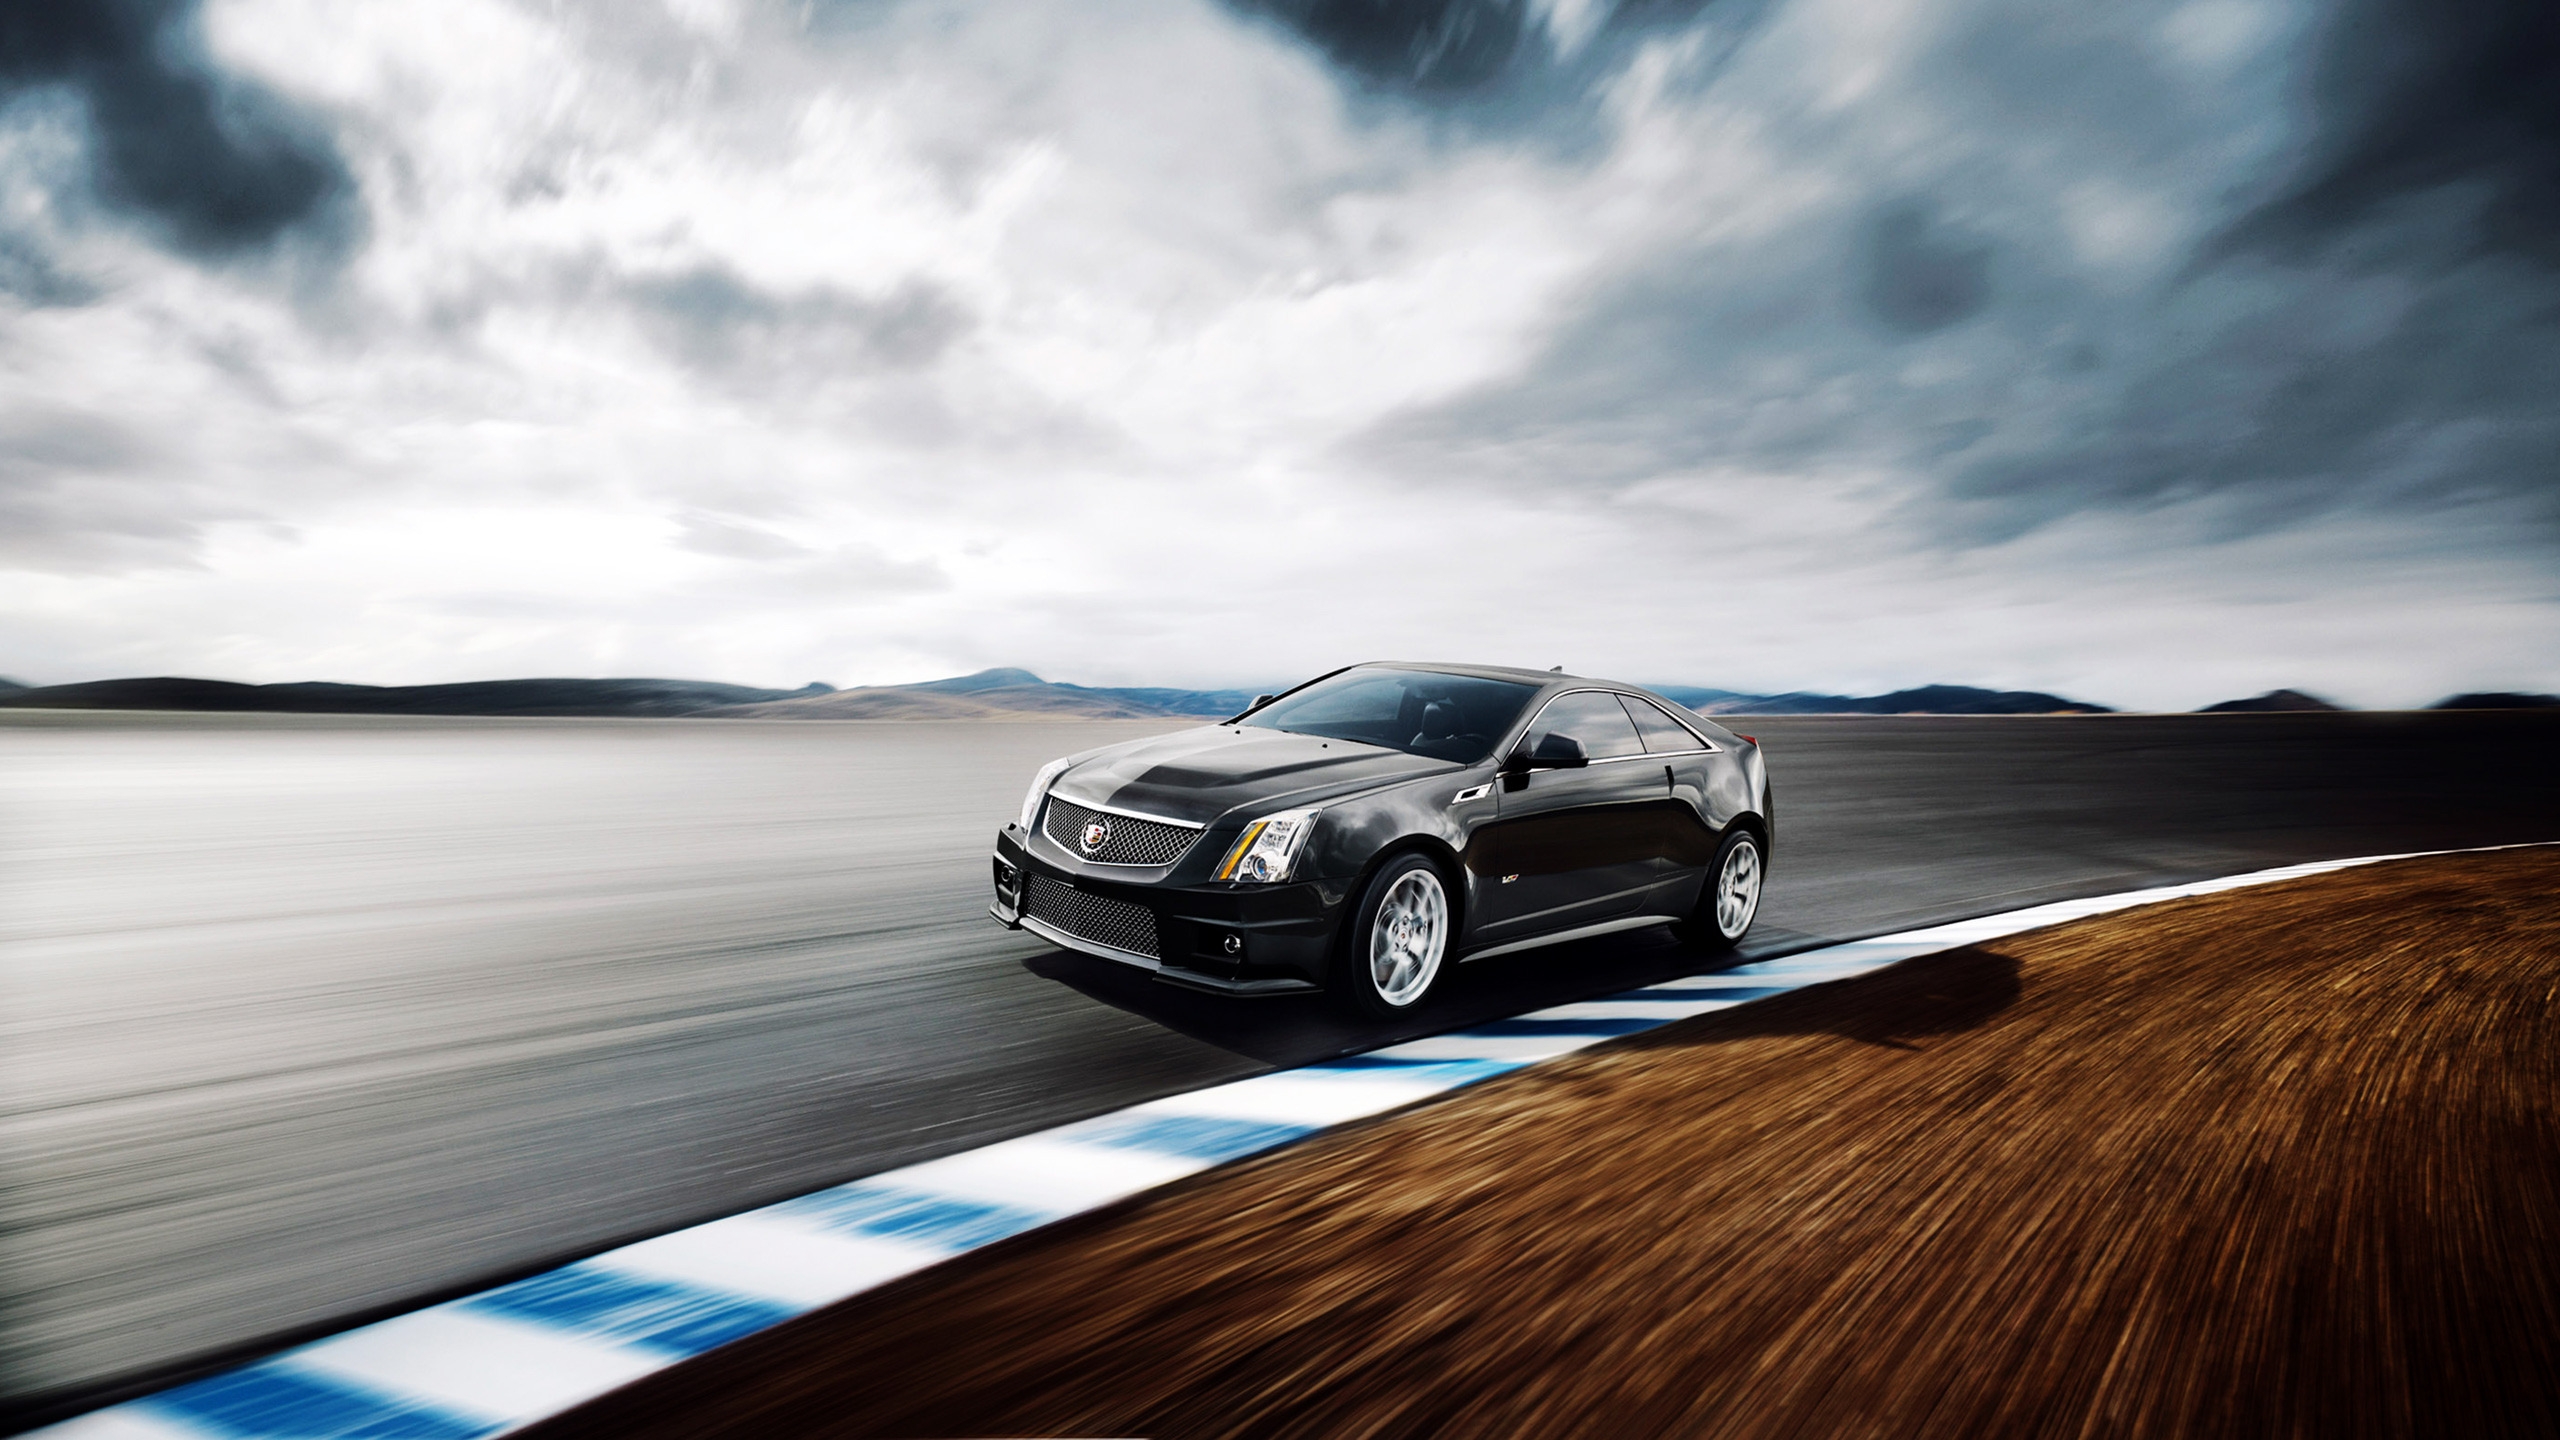 2011 Cadillac CTS V Coupe for 2560x1440 HDTV resolution